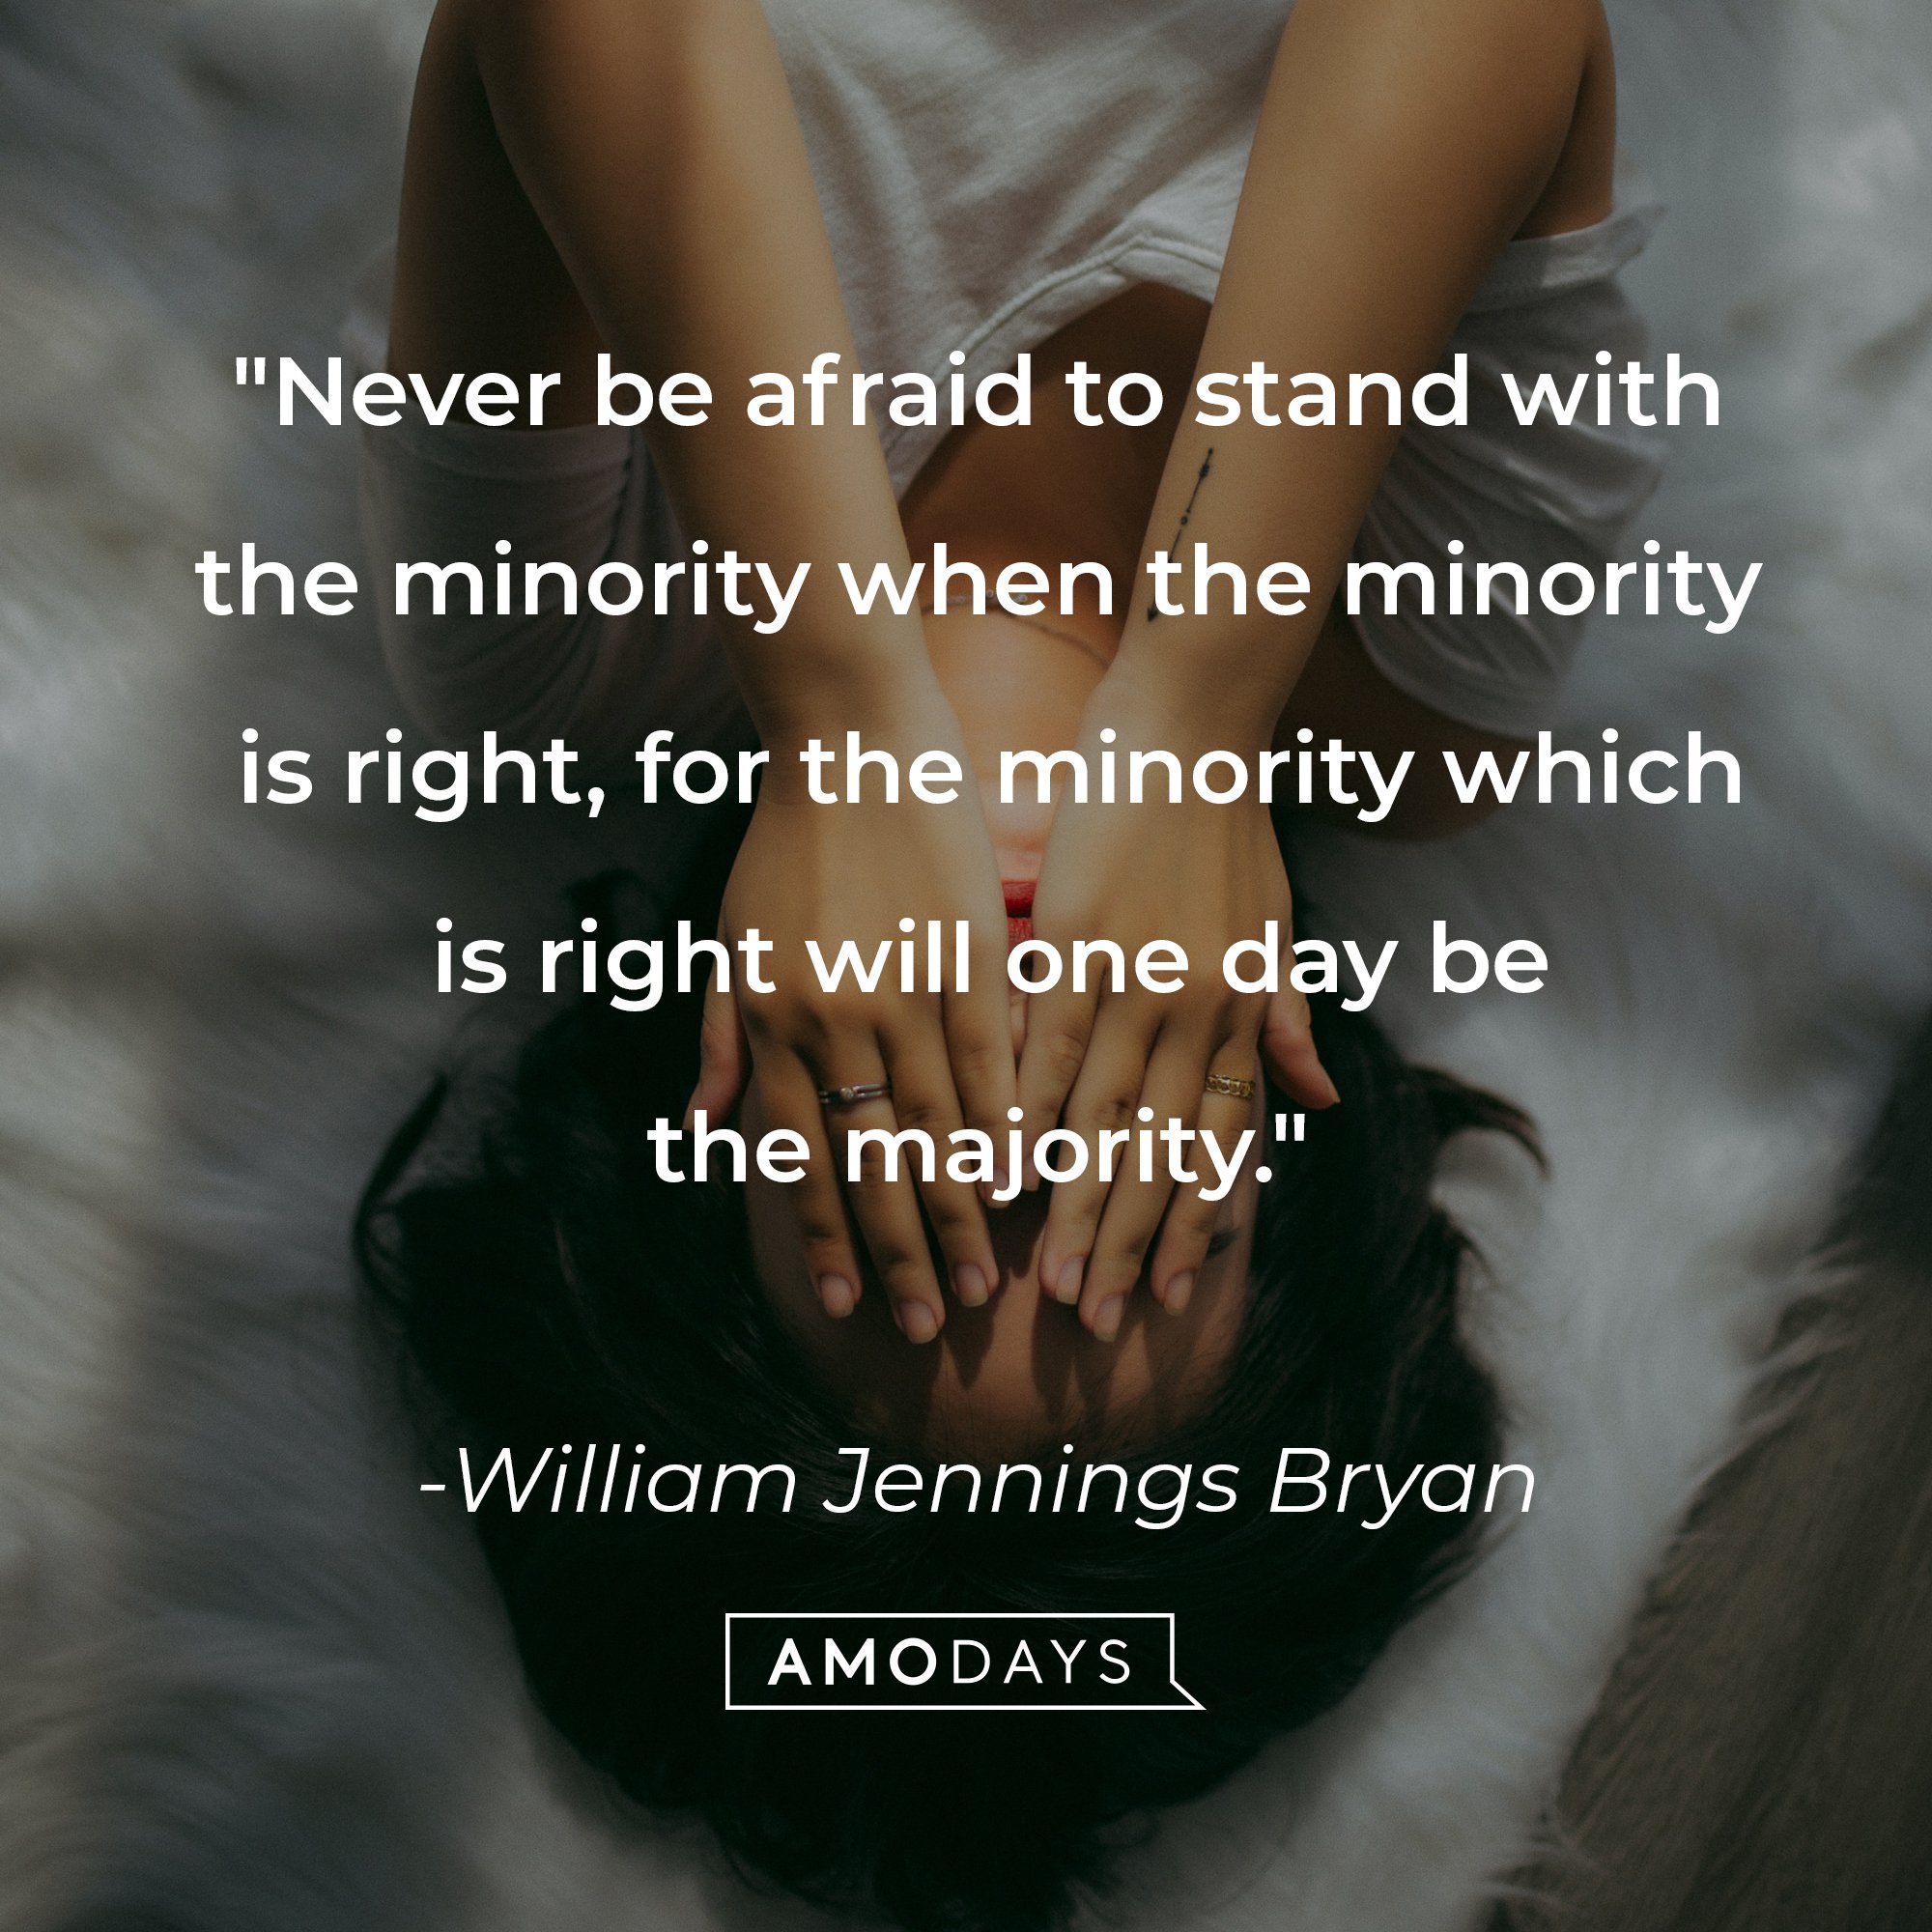 William Jennings Bryan's "Never be afraid to stand with the minority when the minority is right, for the minority which is right will one day be the majority." | Image: AmoDays